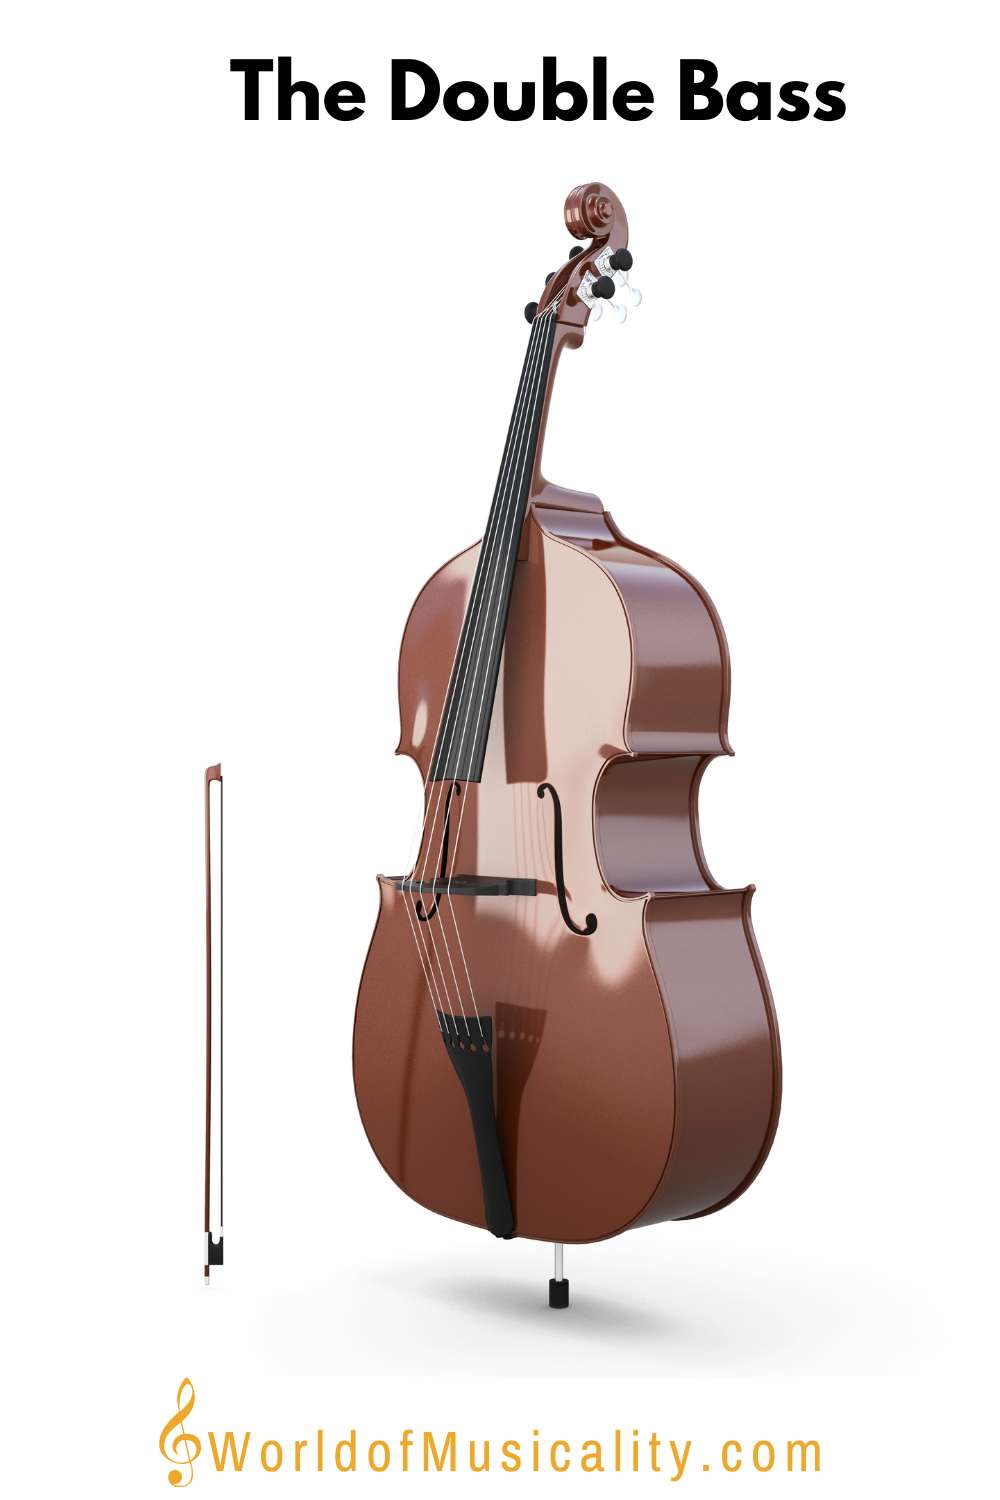 The Double Bass String Instrument